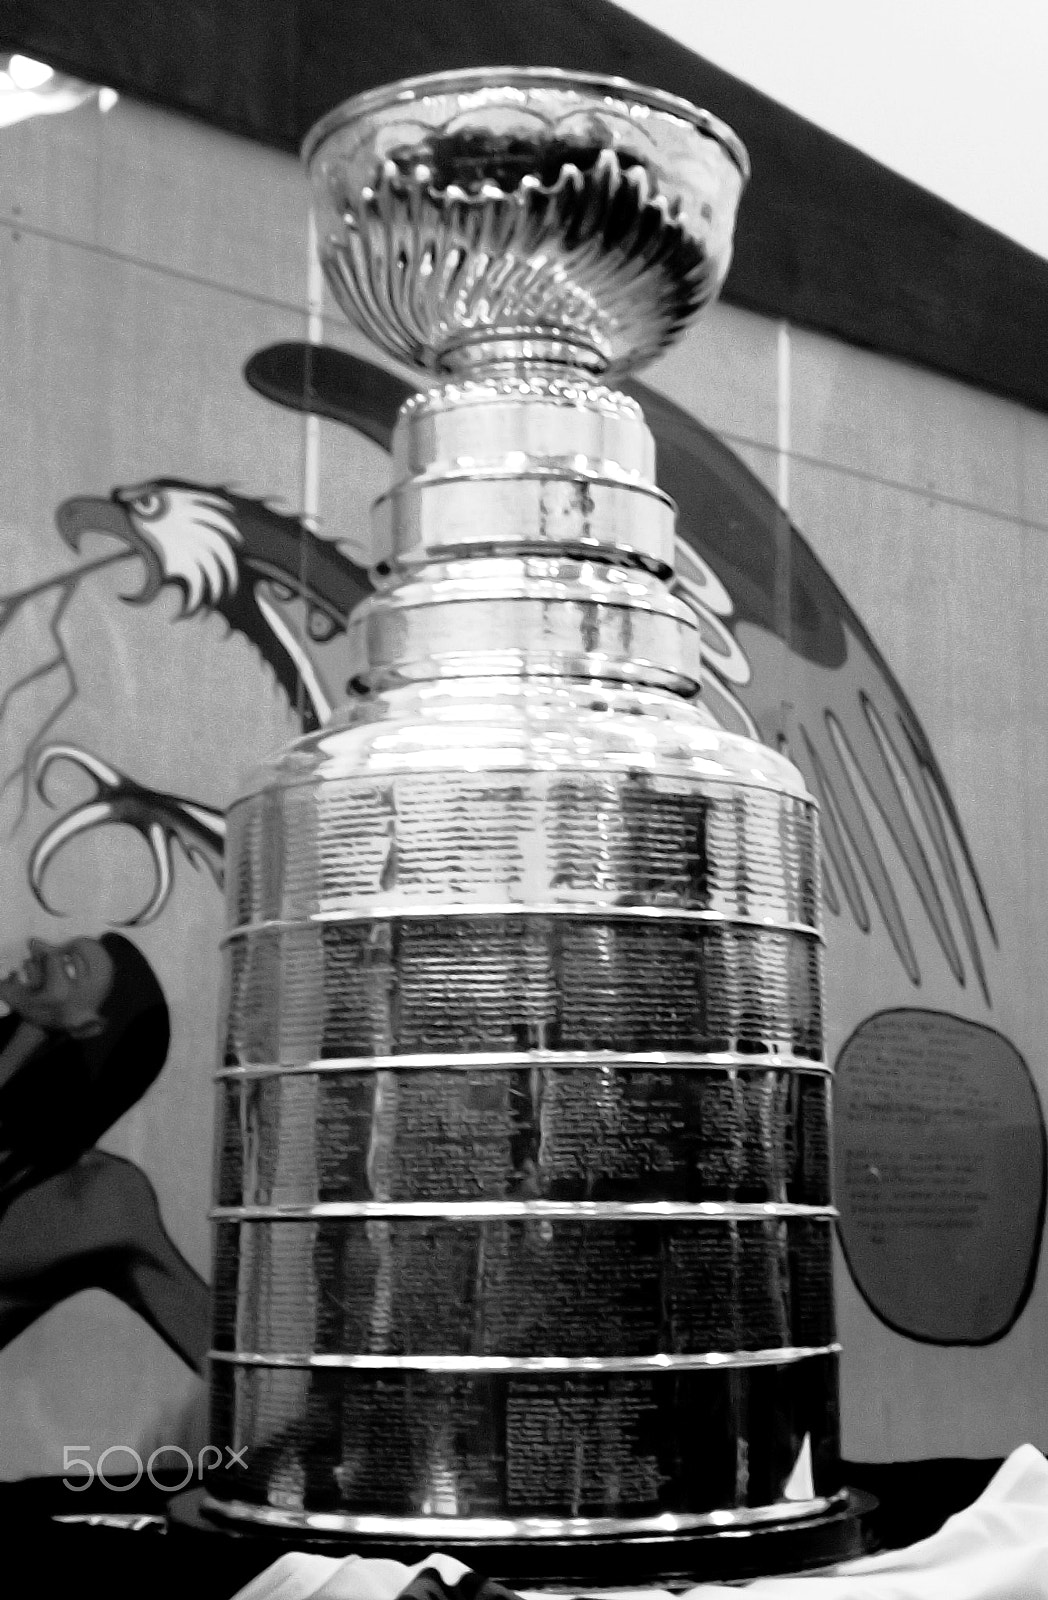 Fujifilm FinePix S4300 sample photo. Nhl stanley cup in sandy lake, ontario. canada. photography